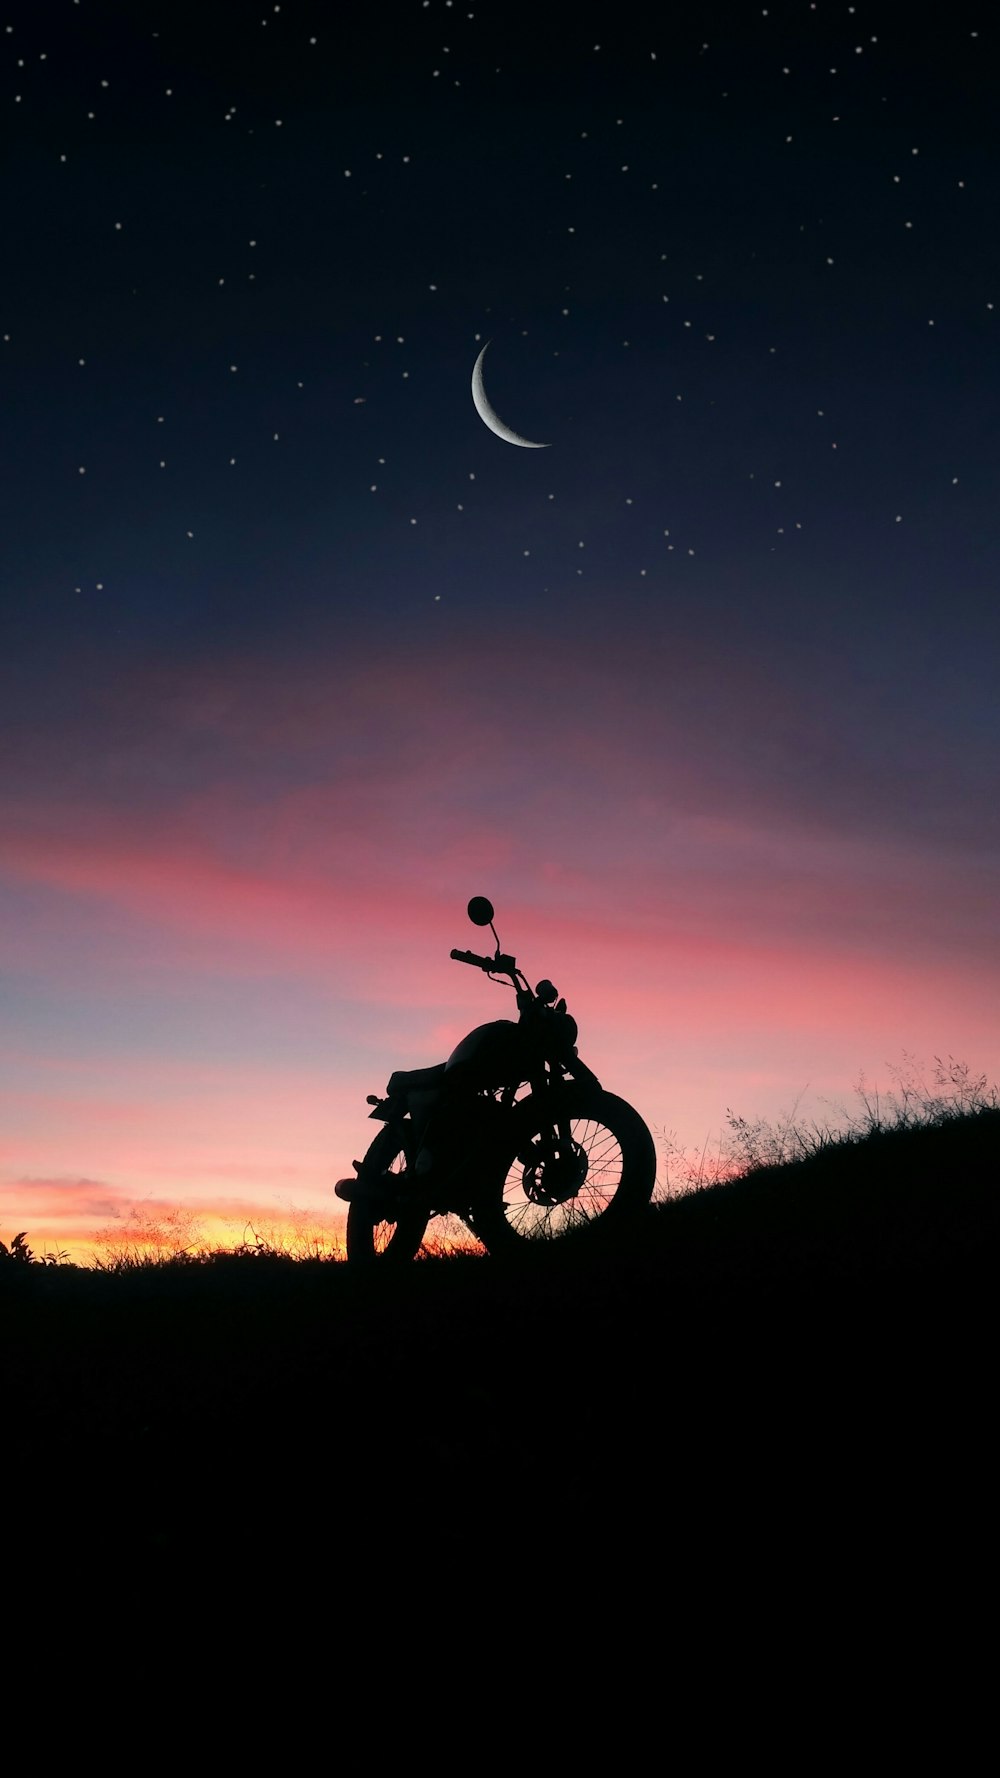 silhouette of motorcycle on grass field at night